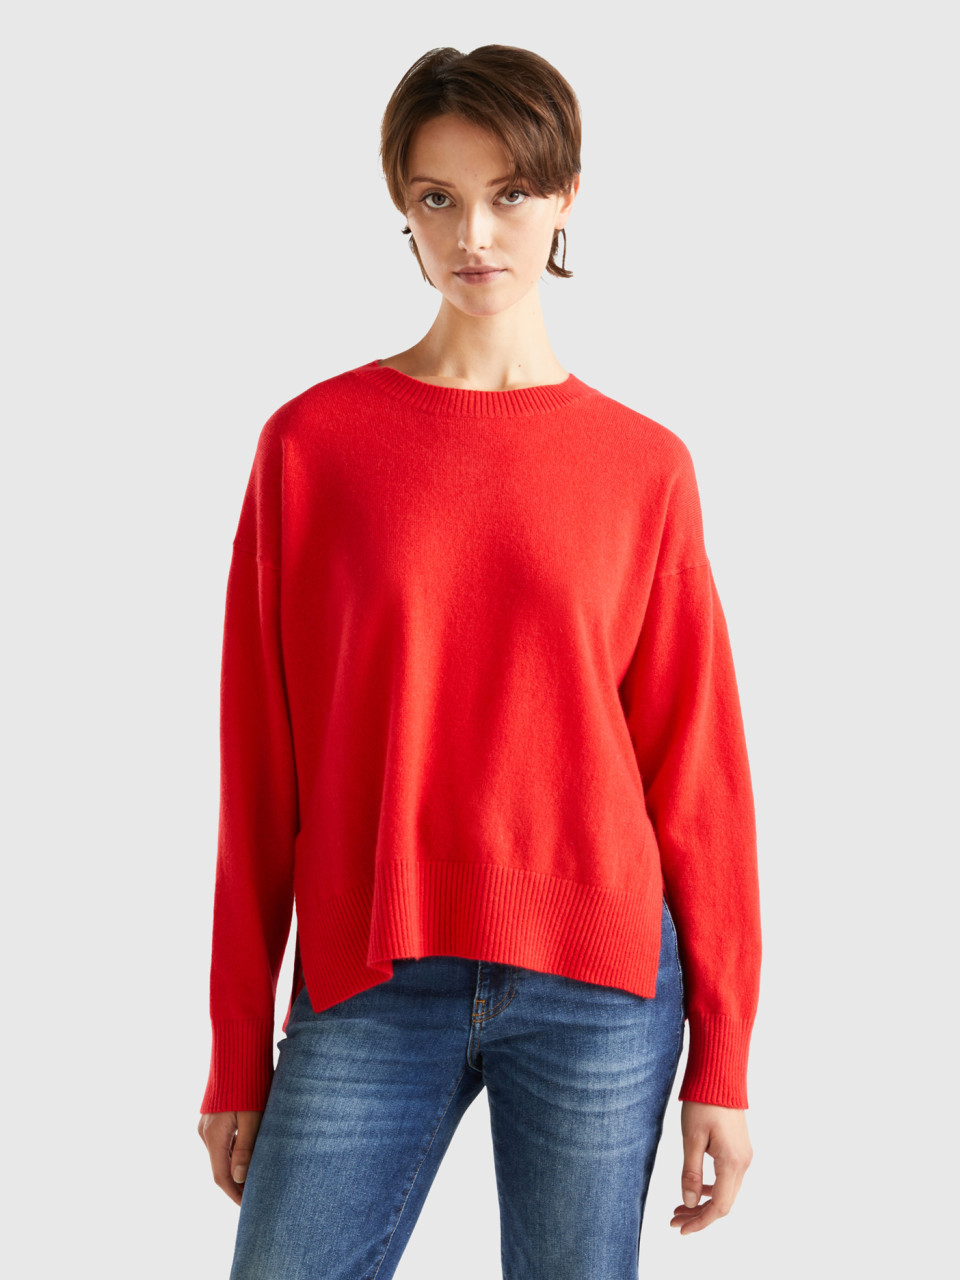 Benetton, Coral Red Sweater In 100% Cashmere, , Women